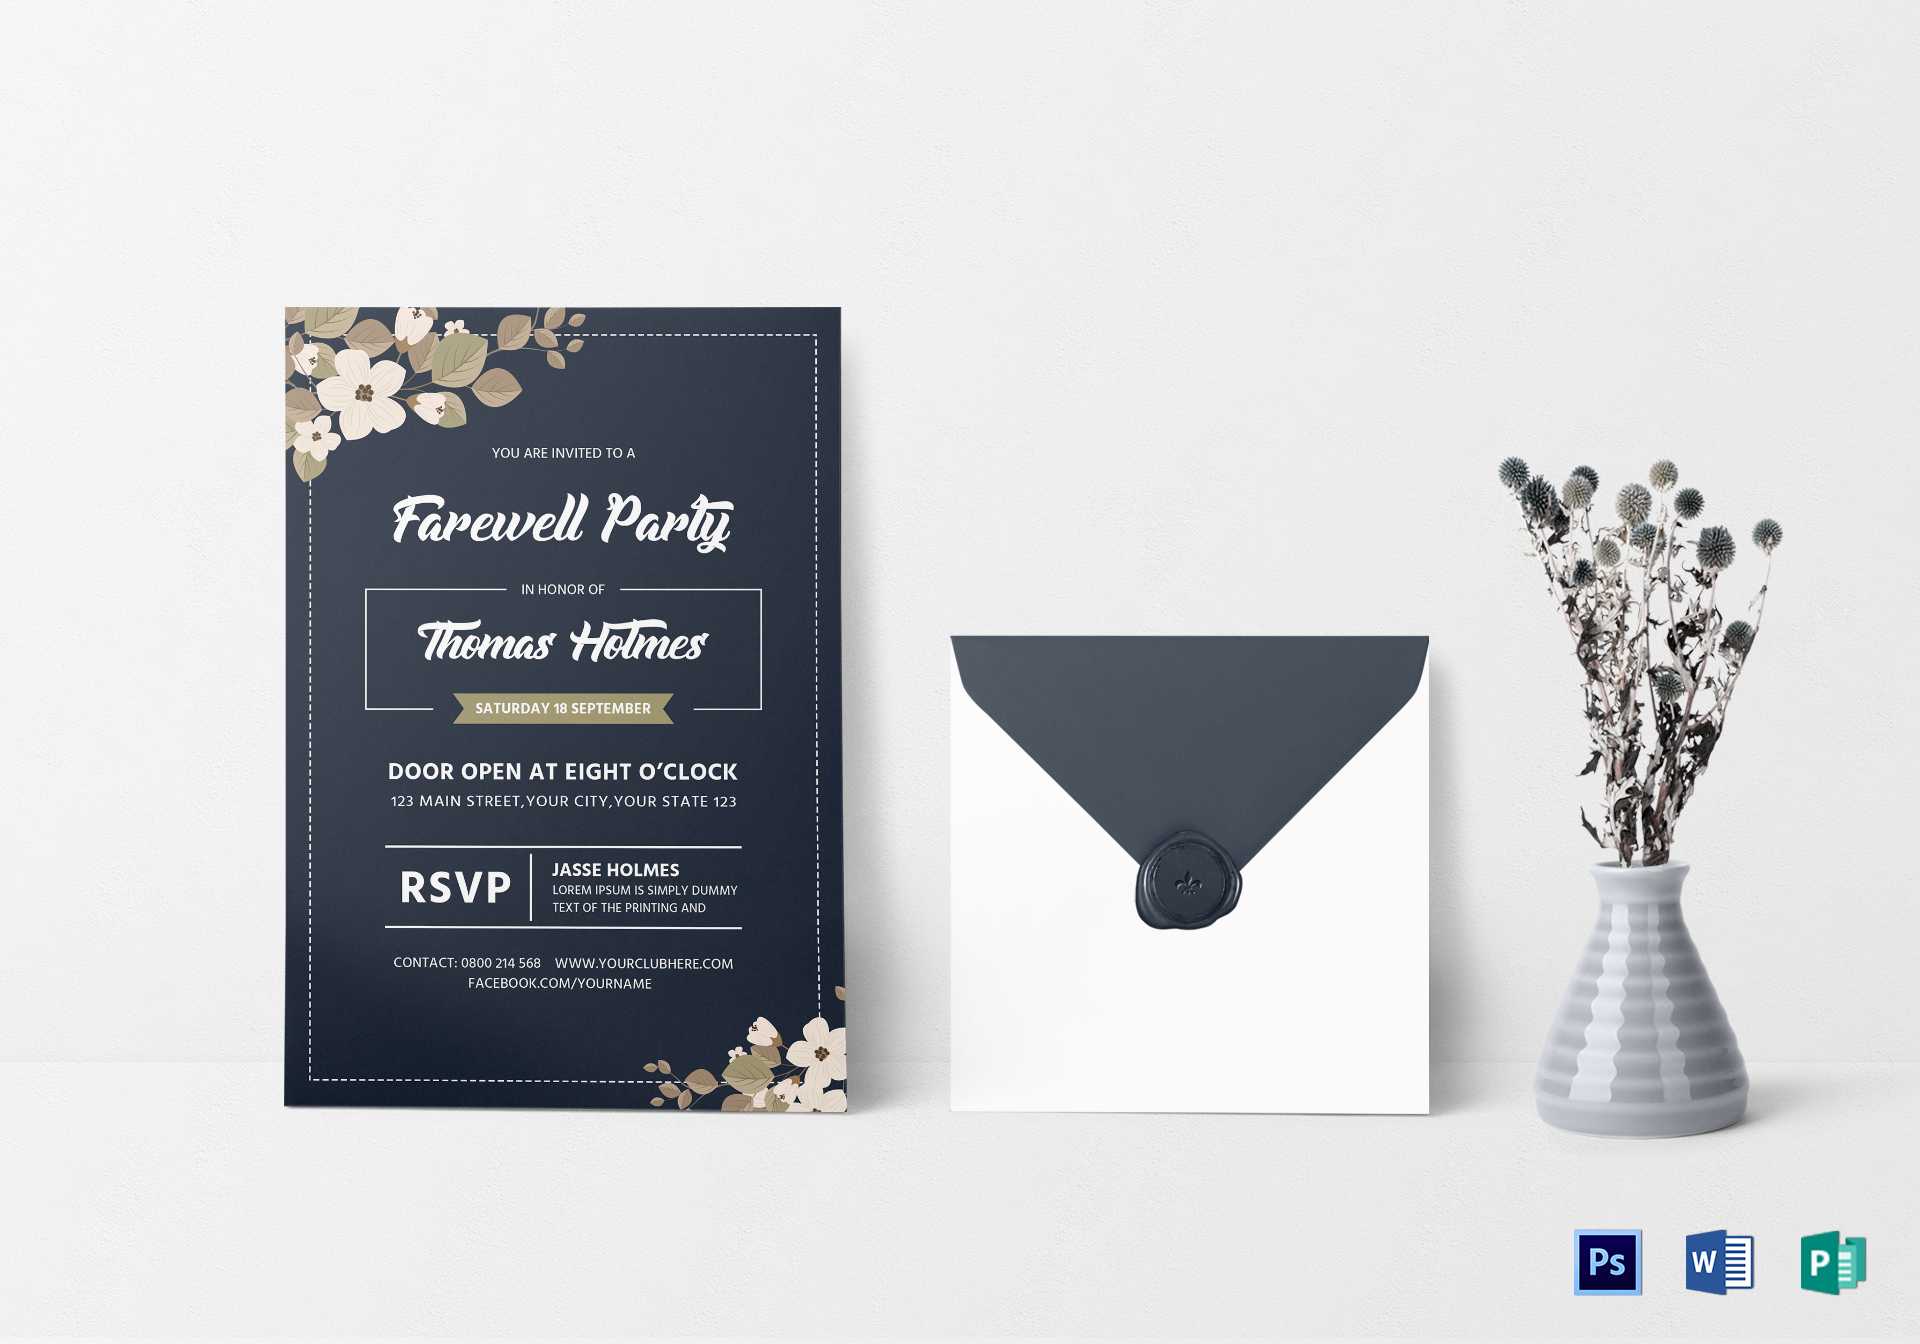 Farewell Party Invitation Card Template Within Farewell Card Template Word